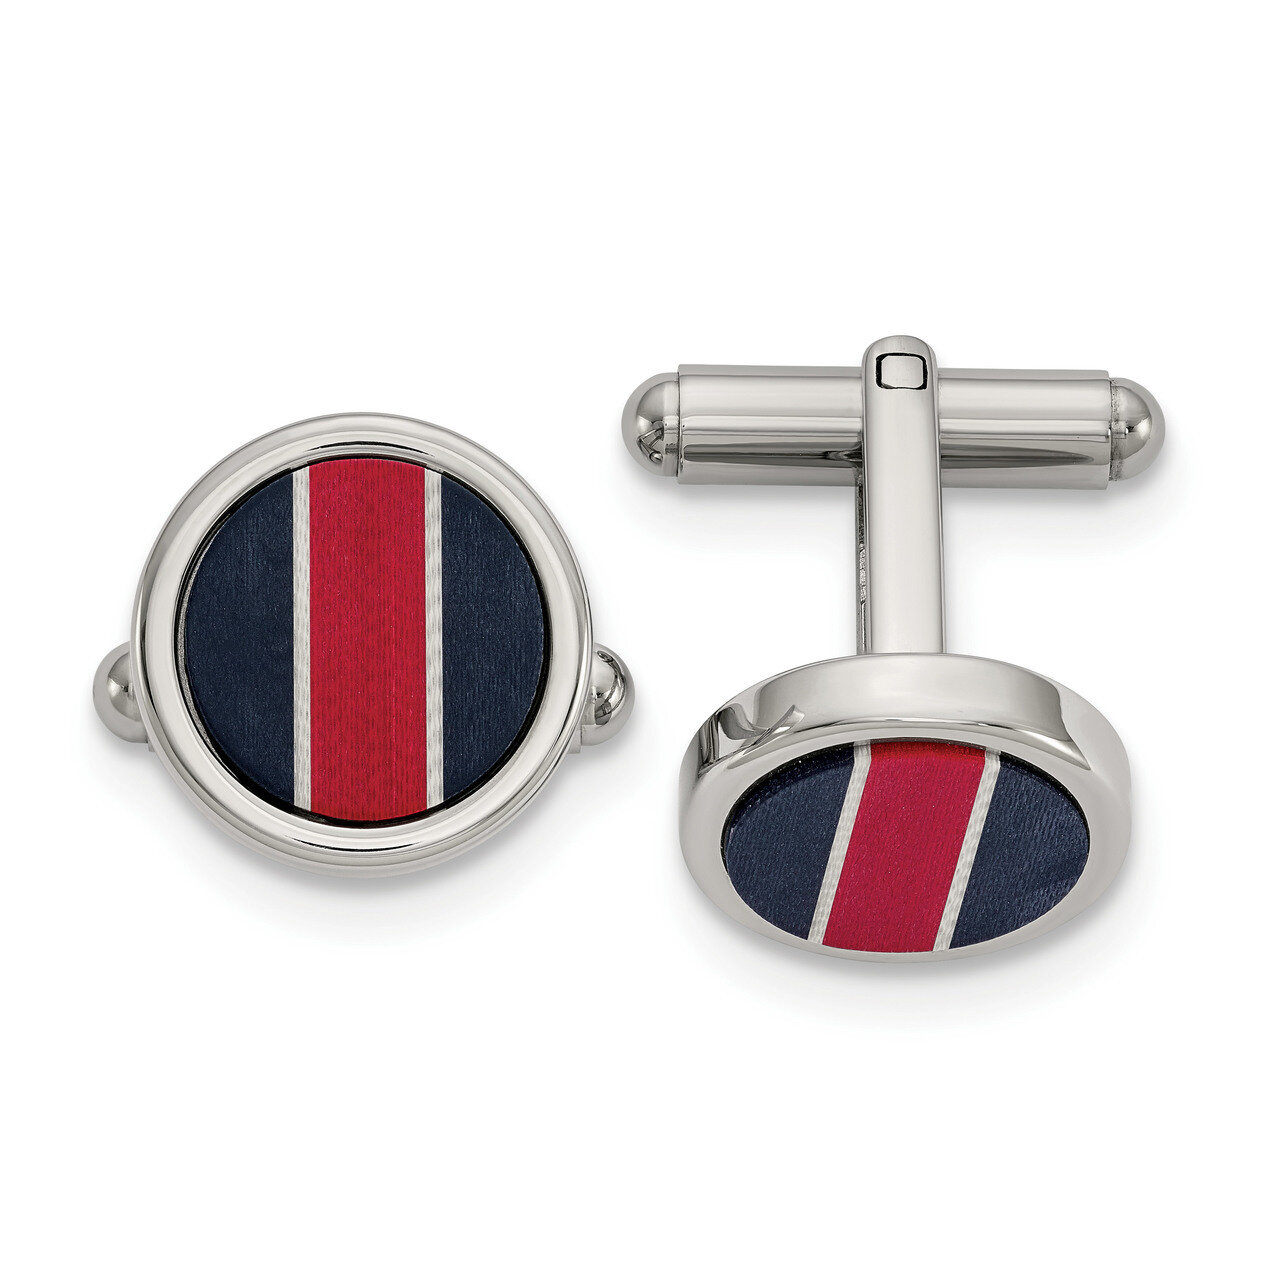 BlackCarbon & Red/White FiberGlass Inlay Cufflinks Stainless Steel Polished SRC406